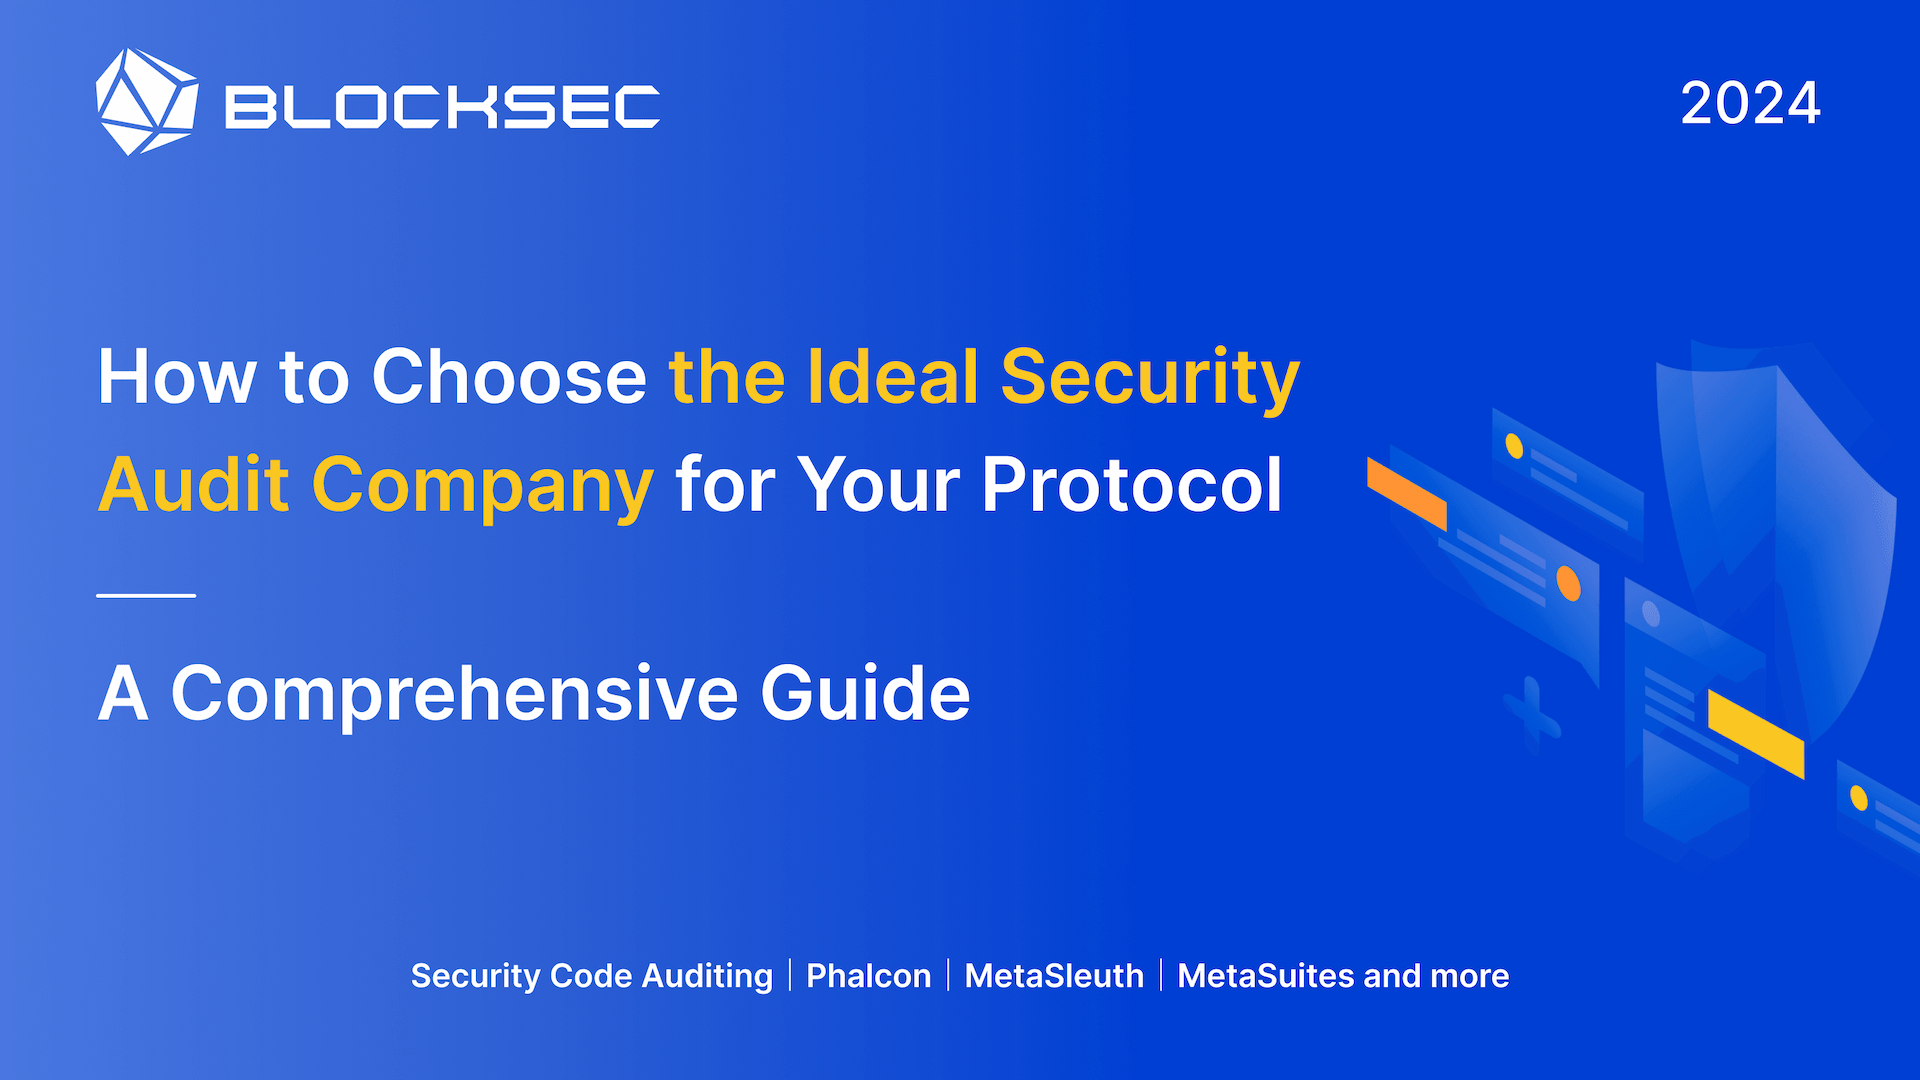 How to Choose the Ideal Security Audit Company for Your Protocol: A Comprehensive Guide